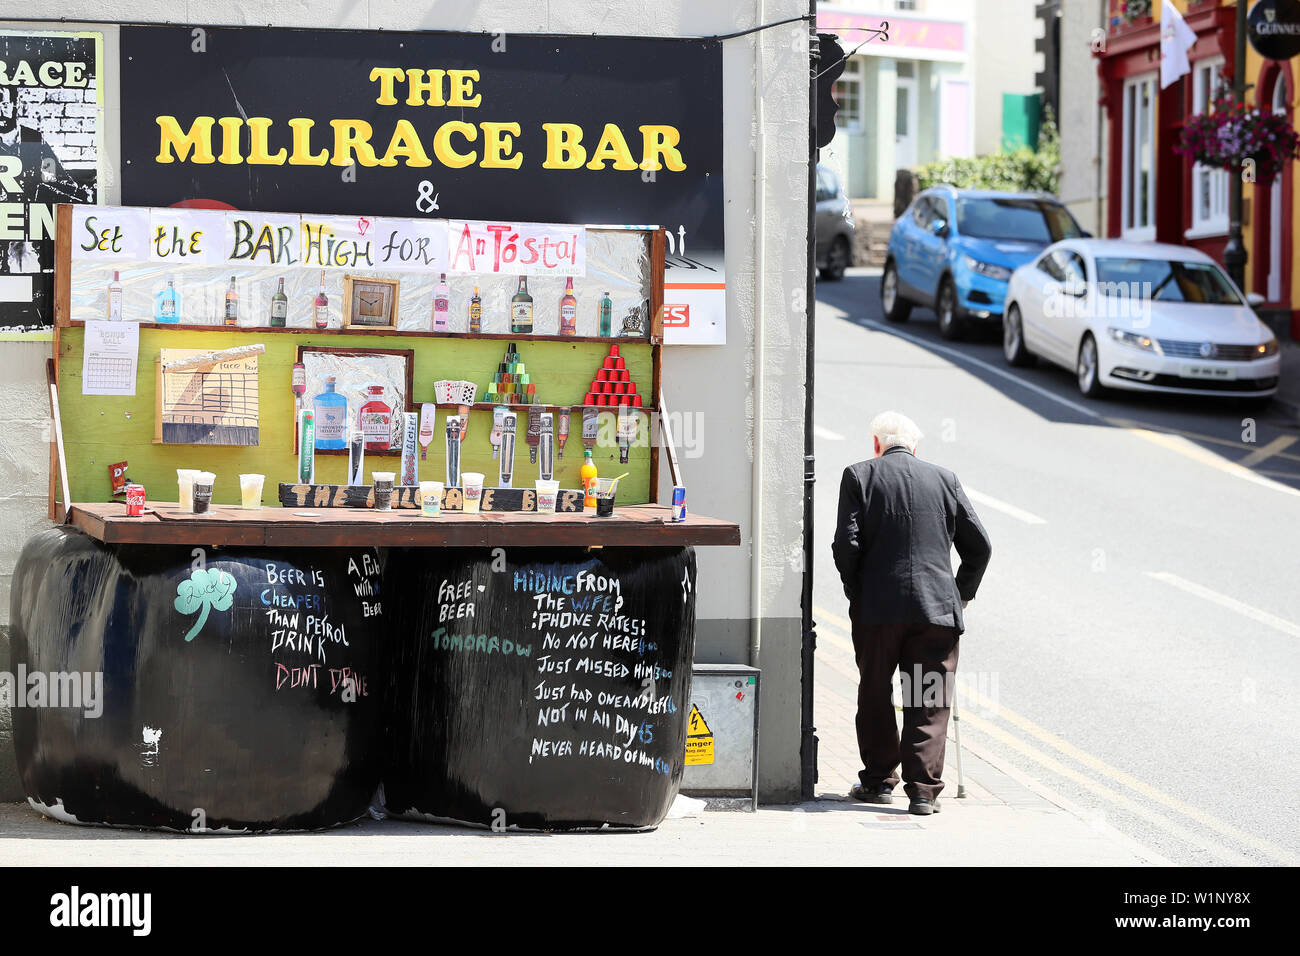 A man walks past a display titled 'Set the Bar High' outside the Millrace Bar, as residents of Drumshanbo, Co. Leitrim, are competing in the 'Stylish Silage' competition as part of the annual An Tostal festival. The competition consists of entries on various themes all of which have bales of silage as their main component. Stock Photo